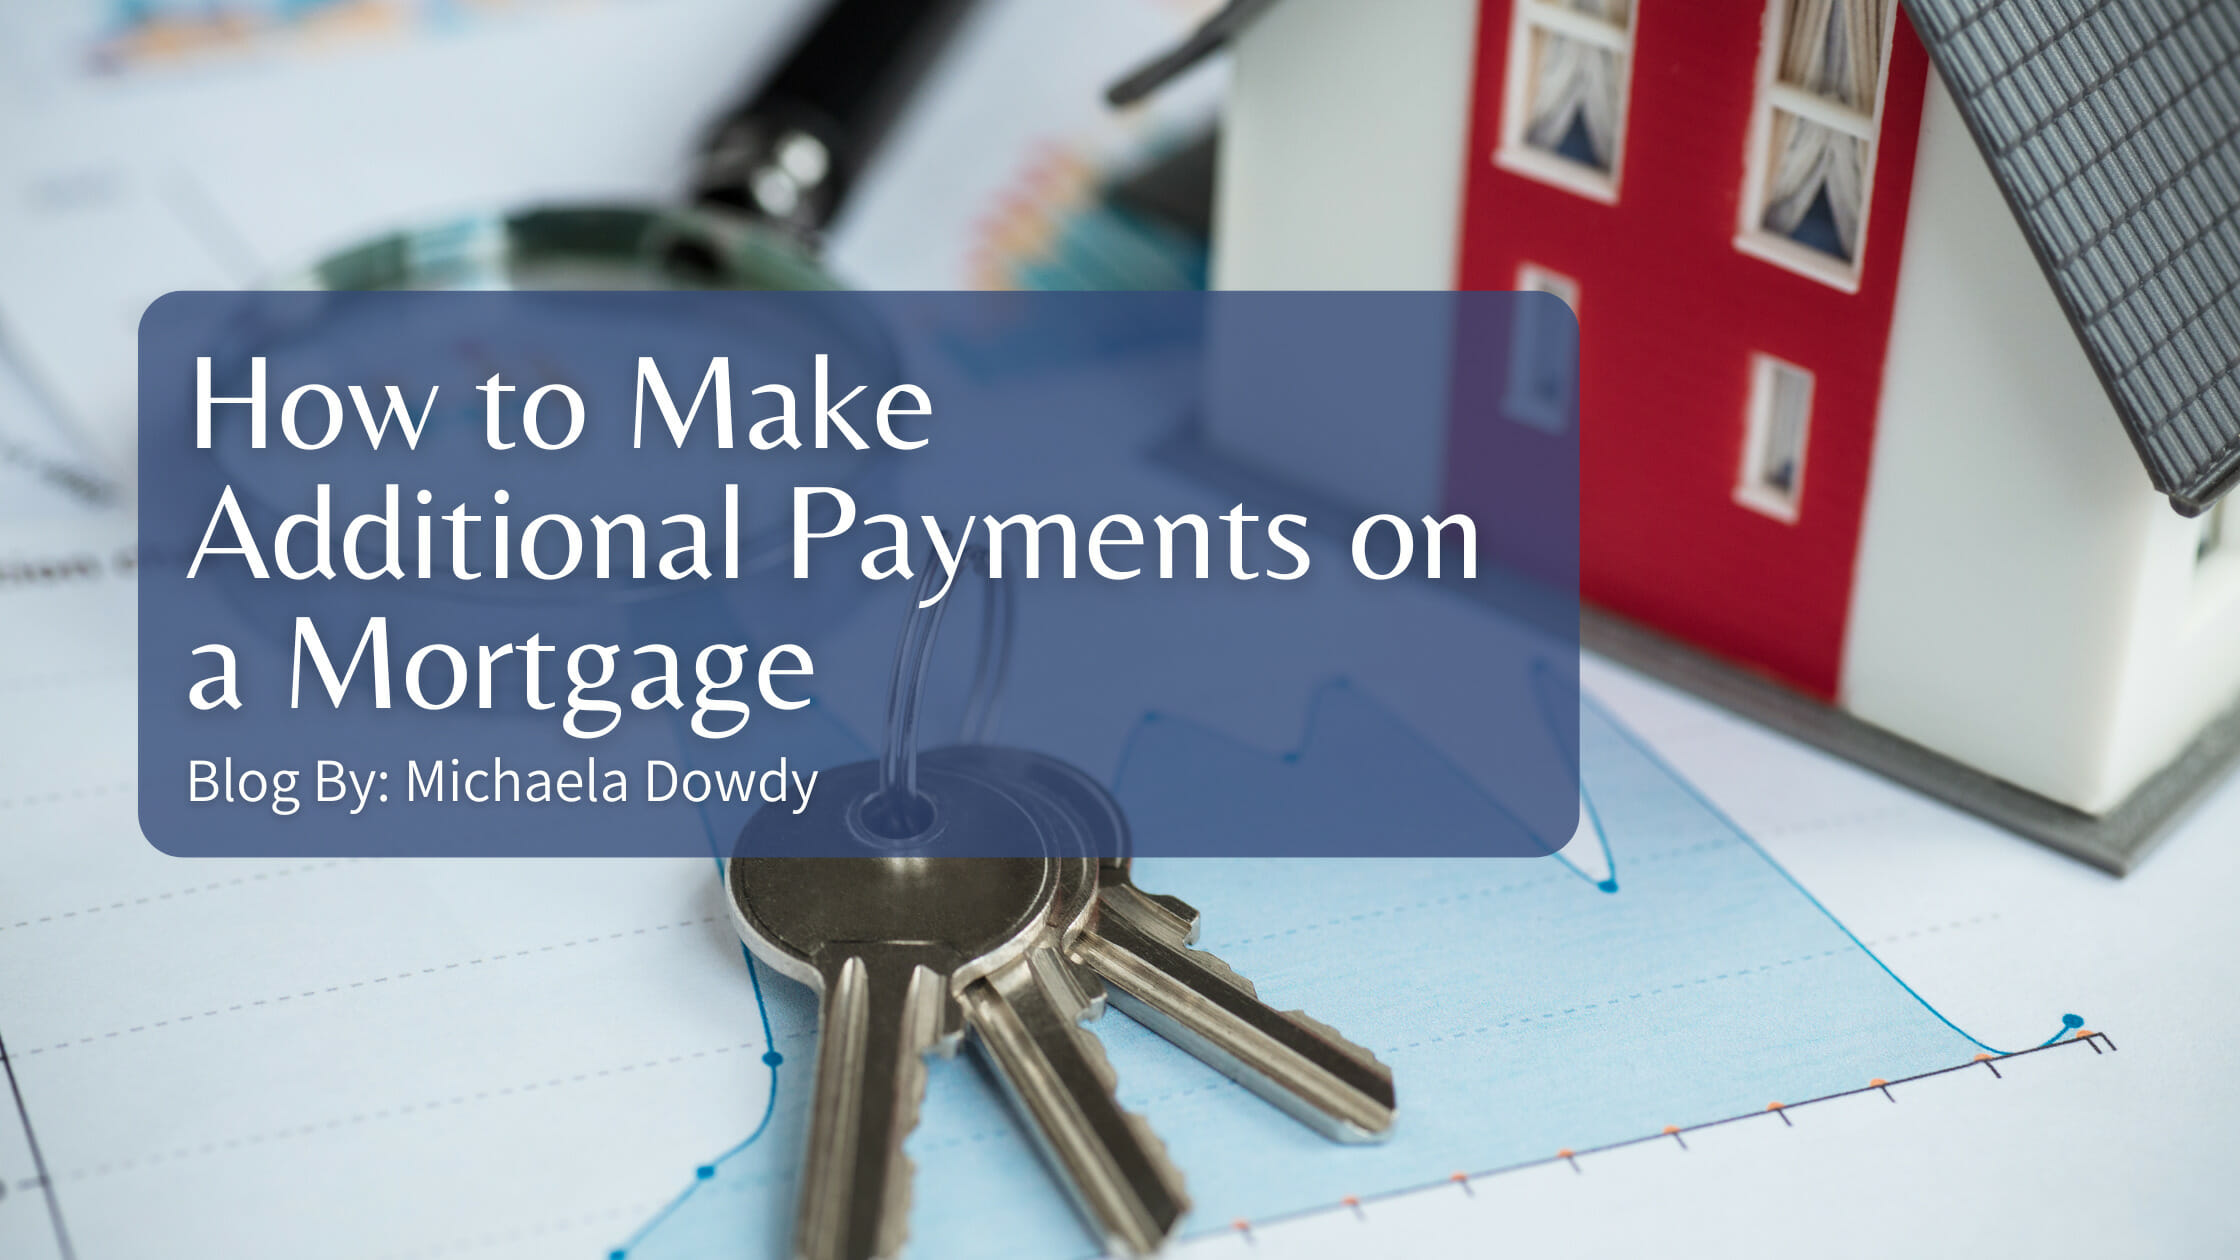 How to Make Additional Payments on a Mortgage